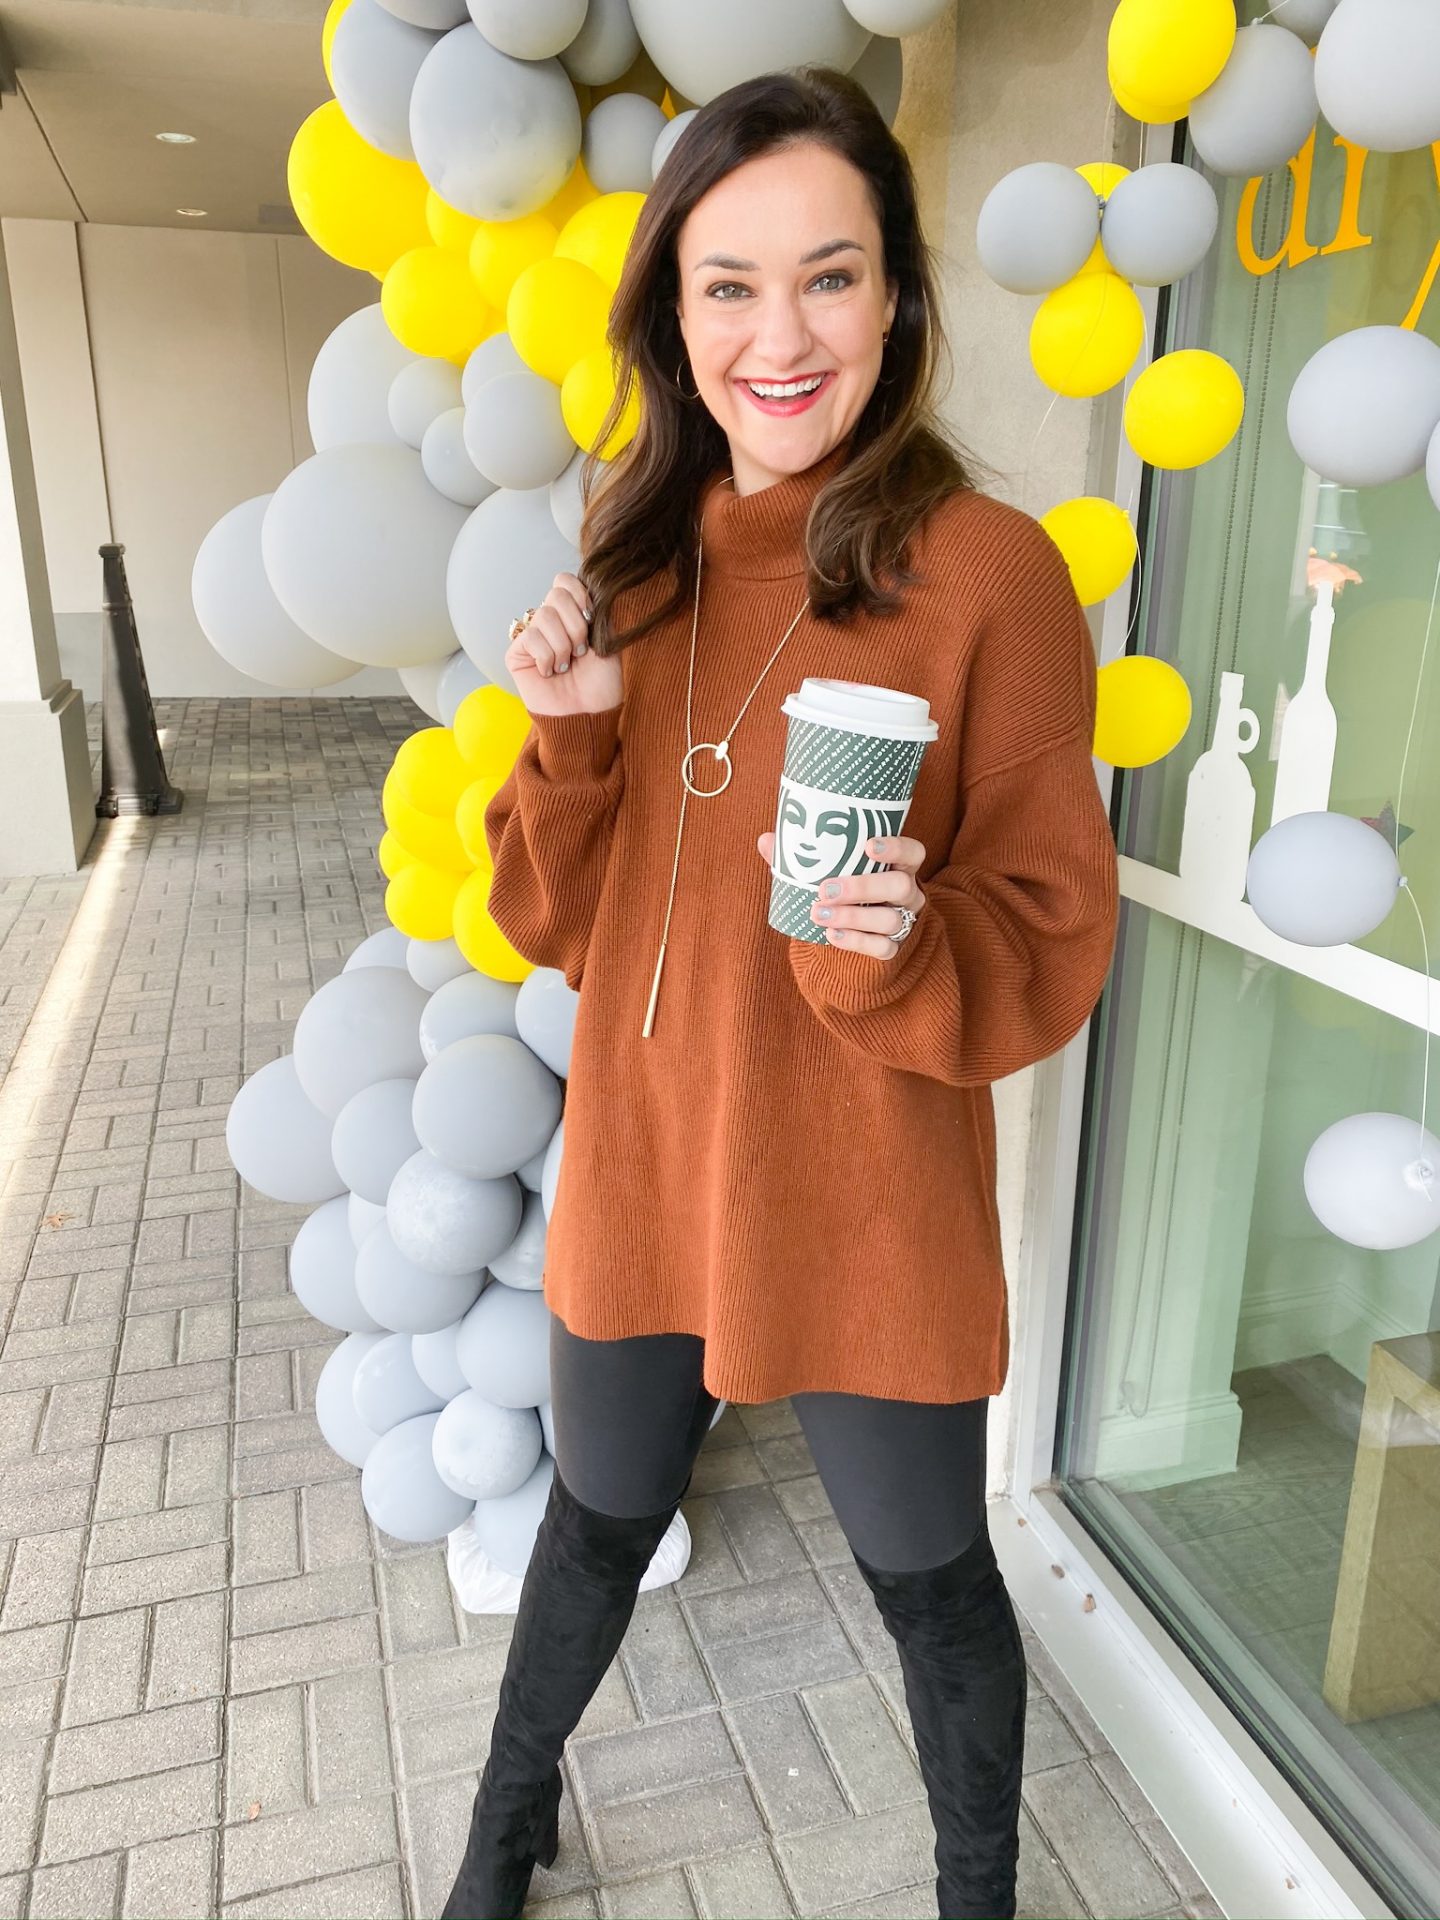 Holiday Honey Hustle Challenge Week 4 + Holiday Starbucks Drinks with Macros by Life + Style blogger, Heather Brown // My Life Well Loved